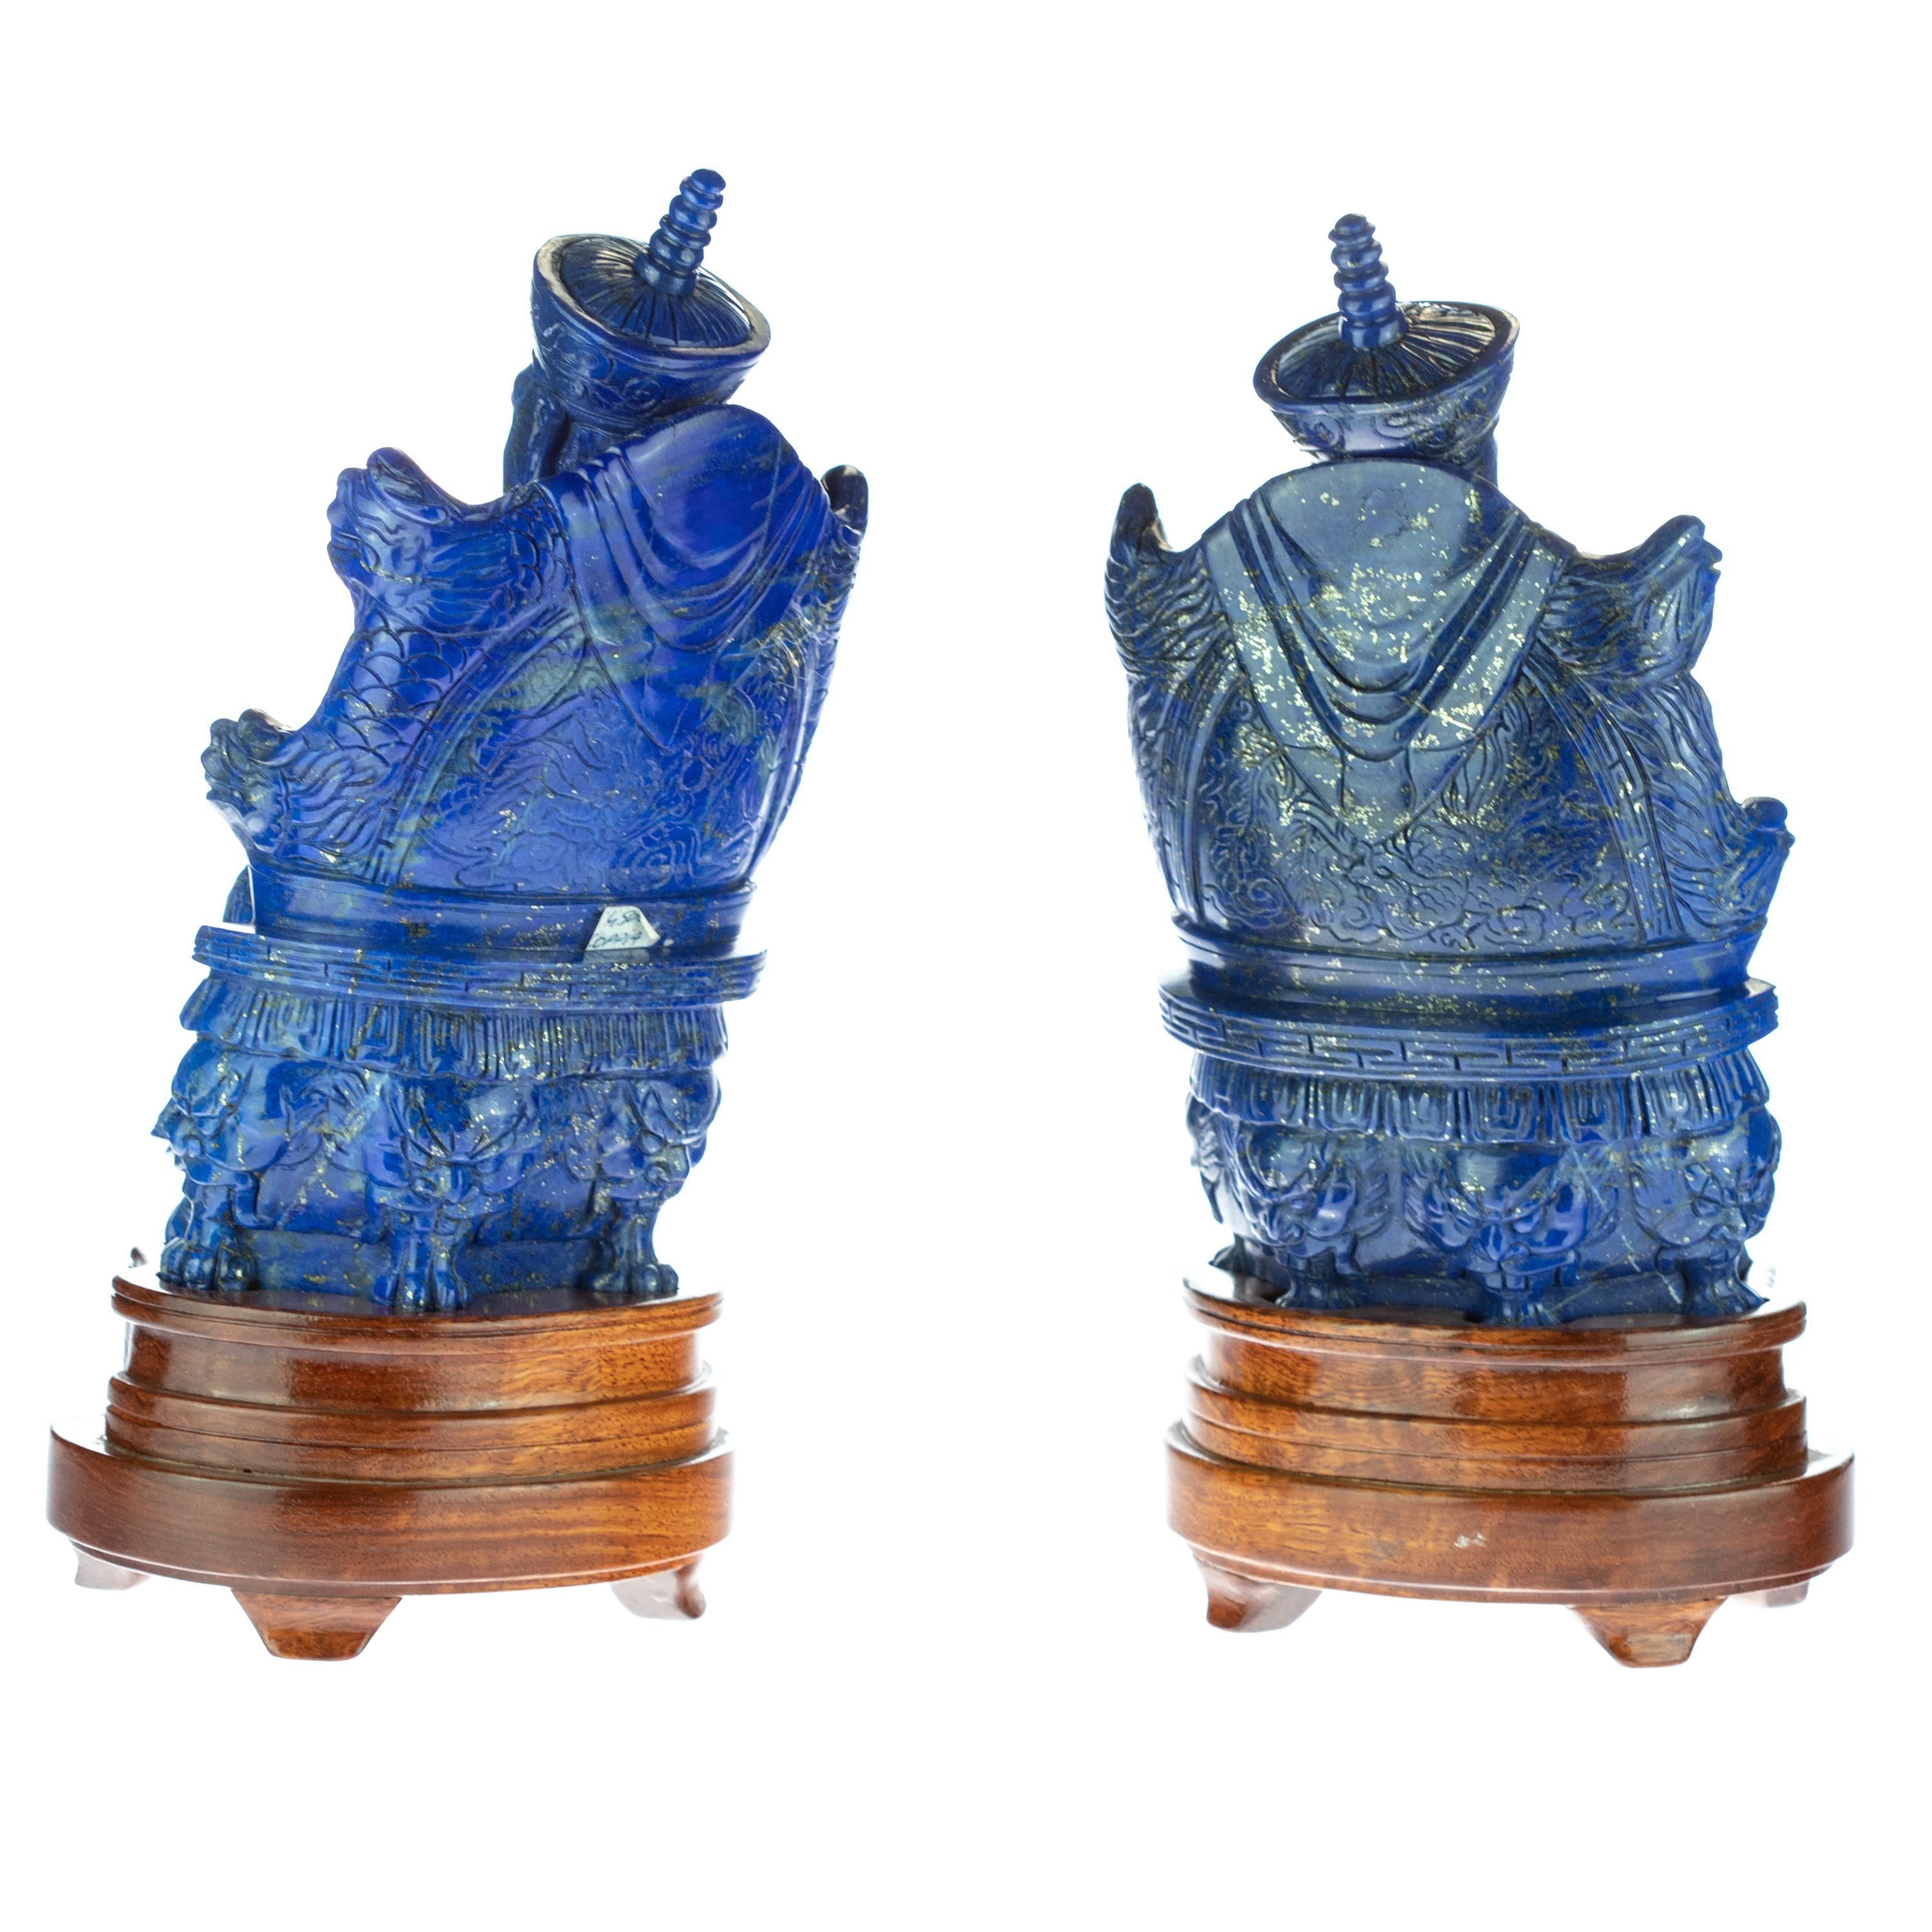 20th Century Lapis Lazuli King Queen Carved Blue Gemstone Artisanal Royalty Statue Sculpture For Sale